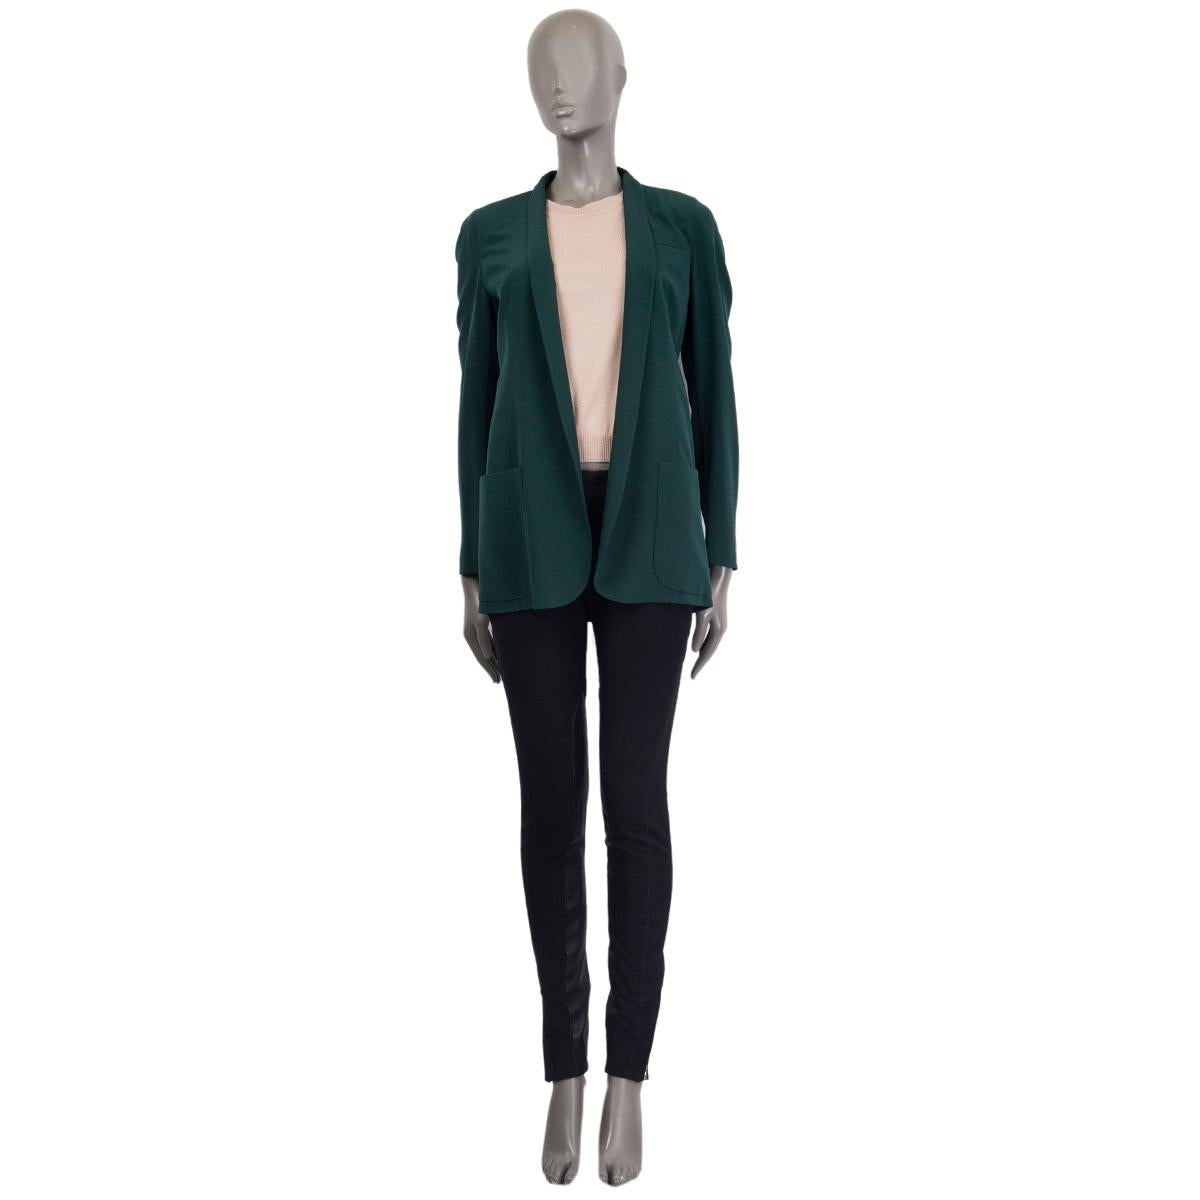 100% authentic Akris shawl-collar blazer in forest green mulberry silk (100%) with two front slip pocket. Lined in viscose. Has been worn and is in excellent condition. 

Measurements
Tag Size	36
Size	S
Shoulder Width	38cm (14.8in)
Bust From	88cm